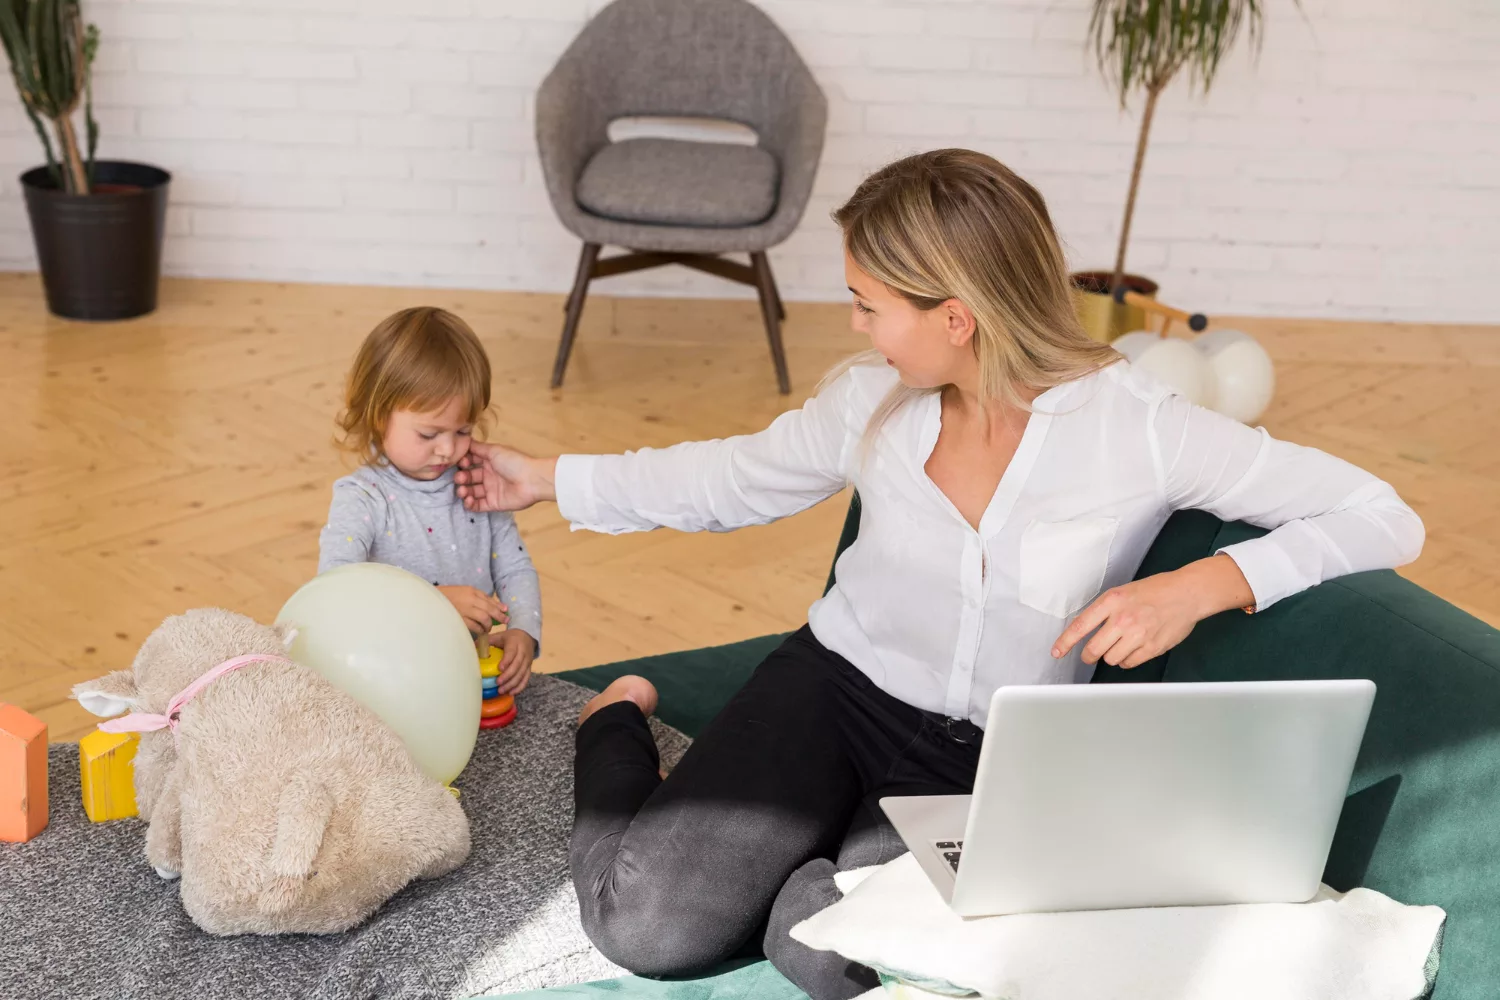 Teen Babysitting Tips: How to Land Clients and Succeed